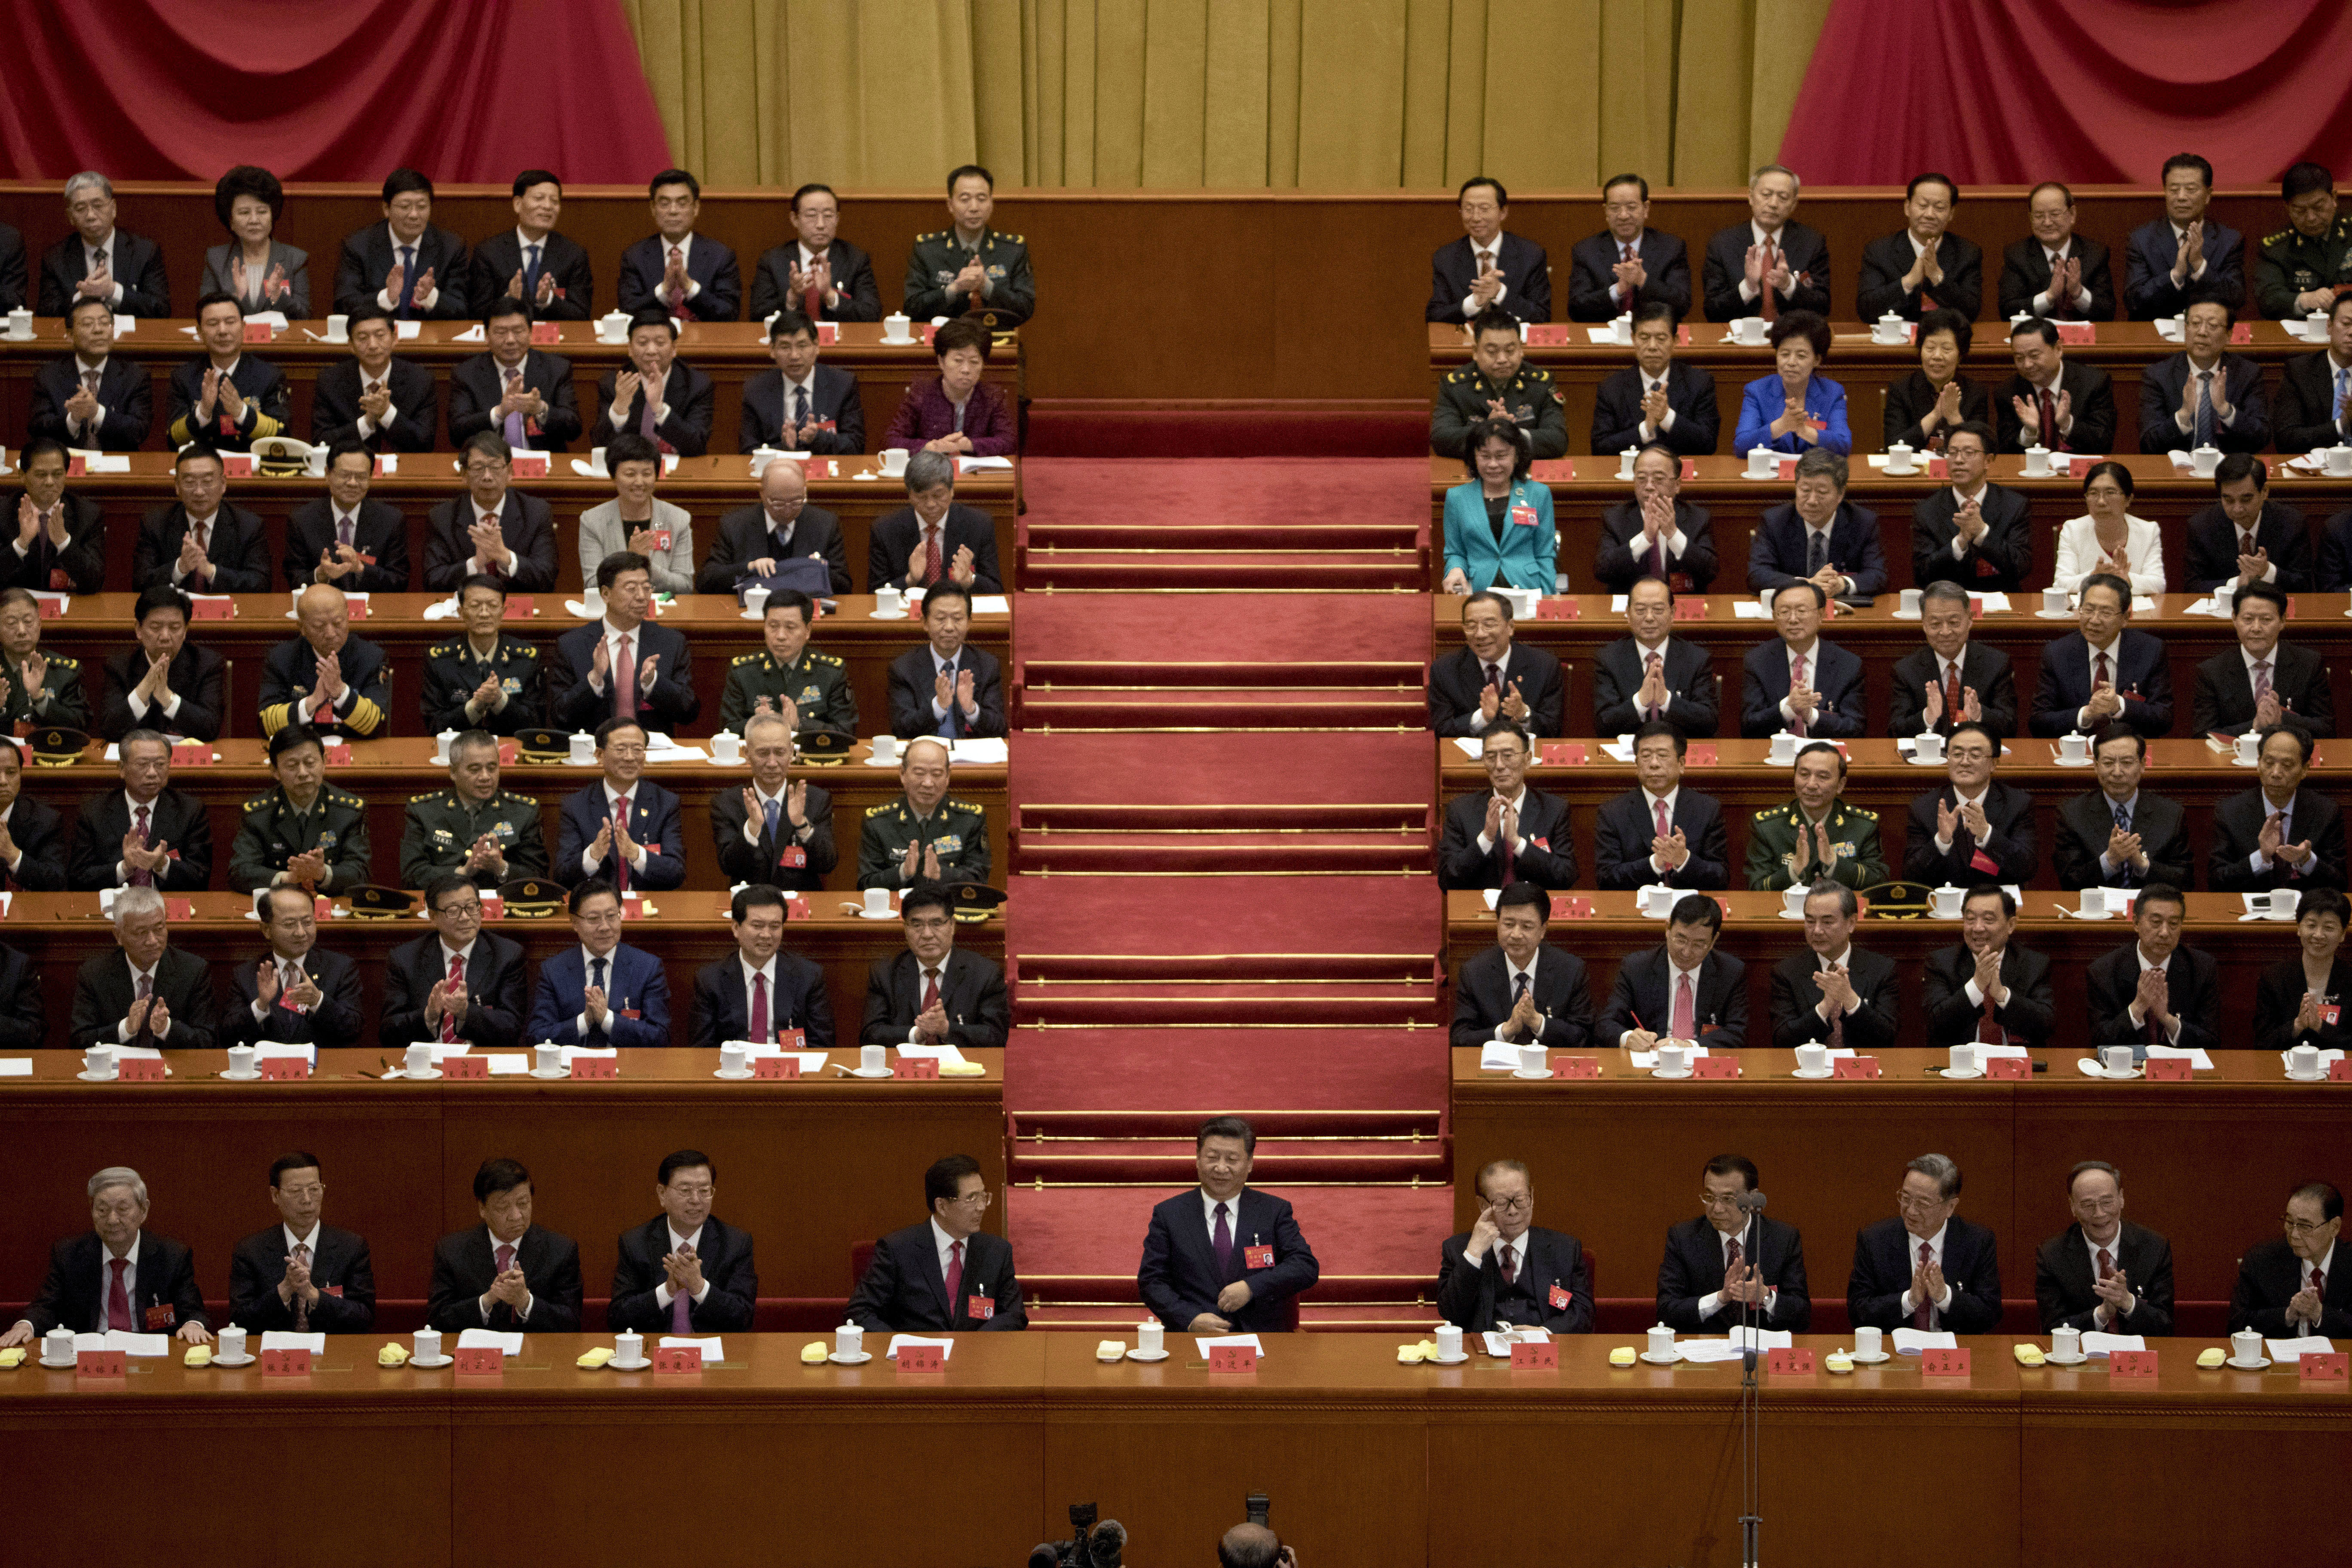 Chinese President Xi Jinping, center, sits with former Chinese President Hu Jintao, fifth left, and Jiang Zemin, fifth right, after delivering his speech at the opening ceremony of the 19th Party Congress held at the Great Hall of the People in Beijing, China, Wednesday, Oct. 18, 2017. Xi on Wednesday urged a reinvigorated Communist Party to take on a more forceful role in society and economic development to better address 